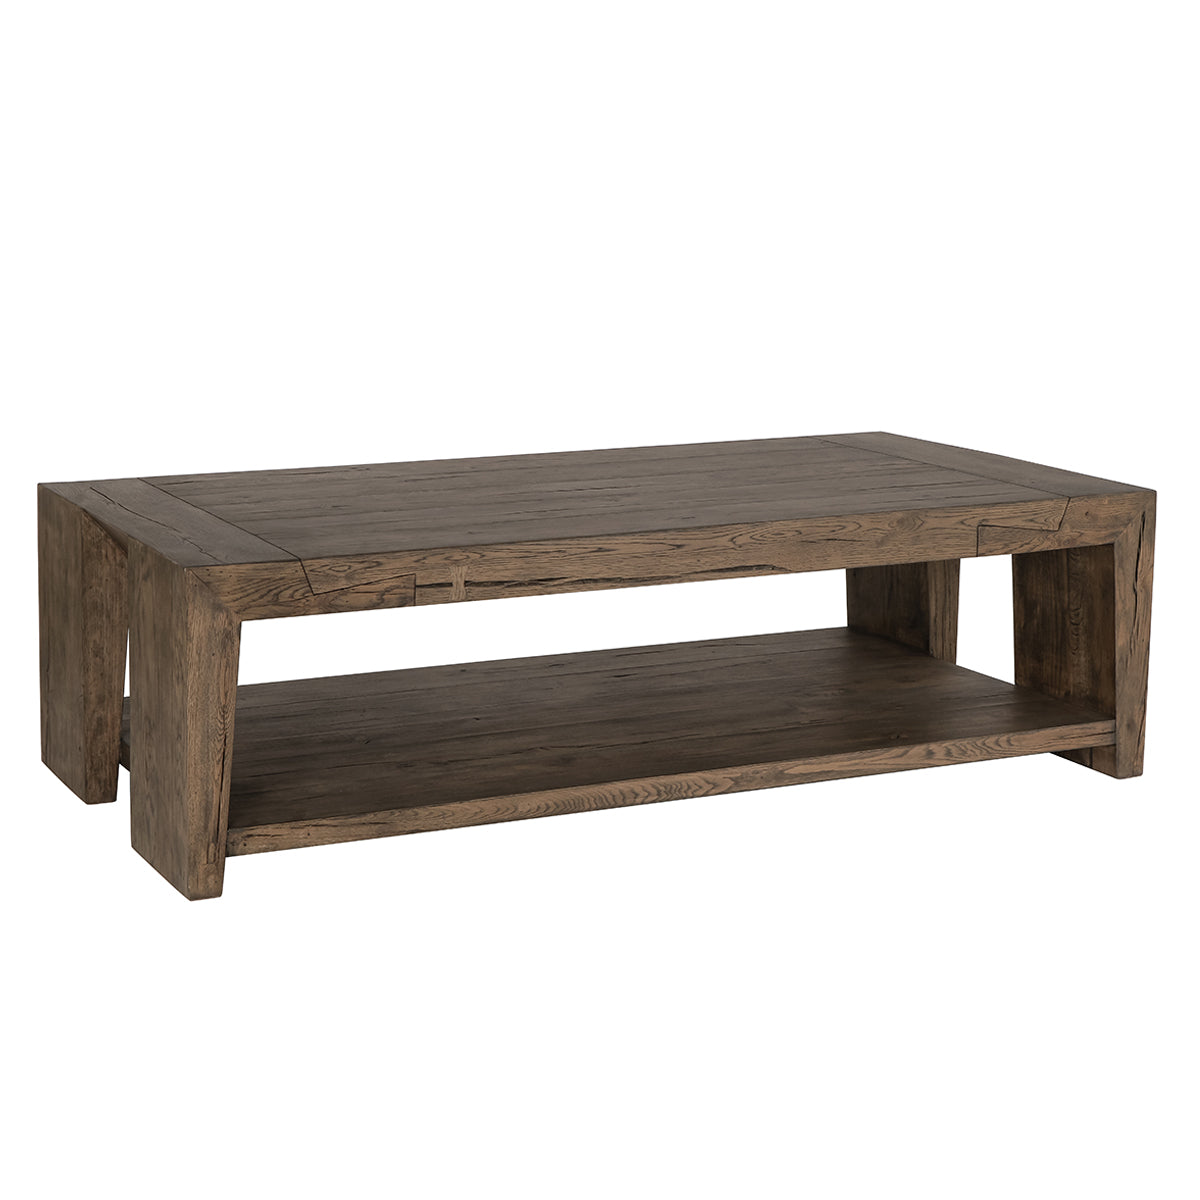 Classic Home Furniture - Troy Coffee Table - 51031326